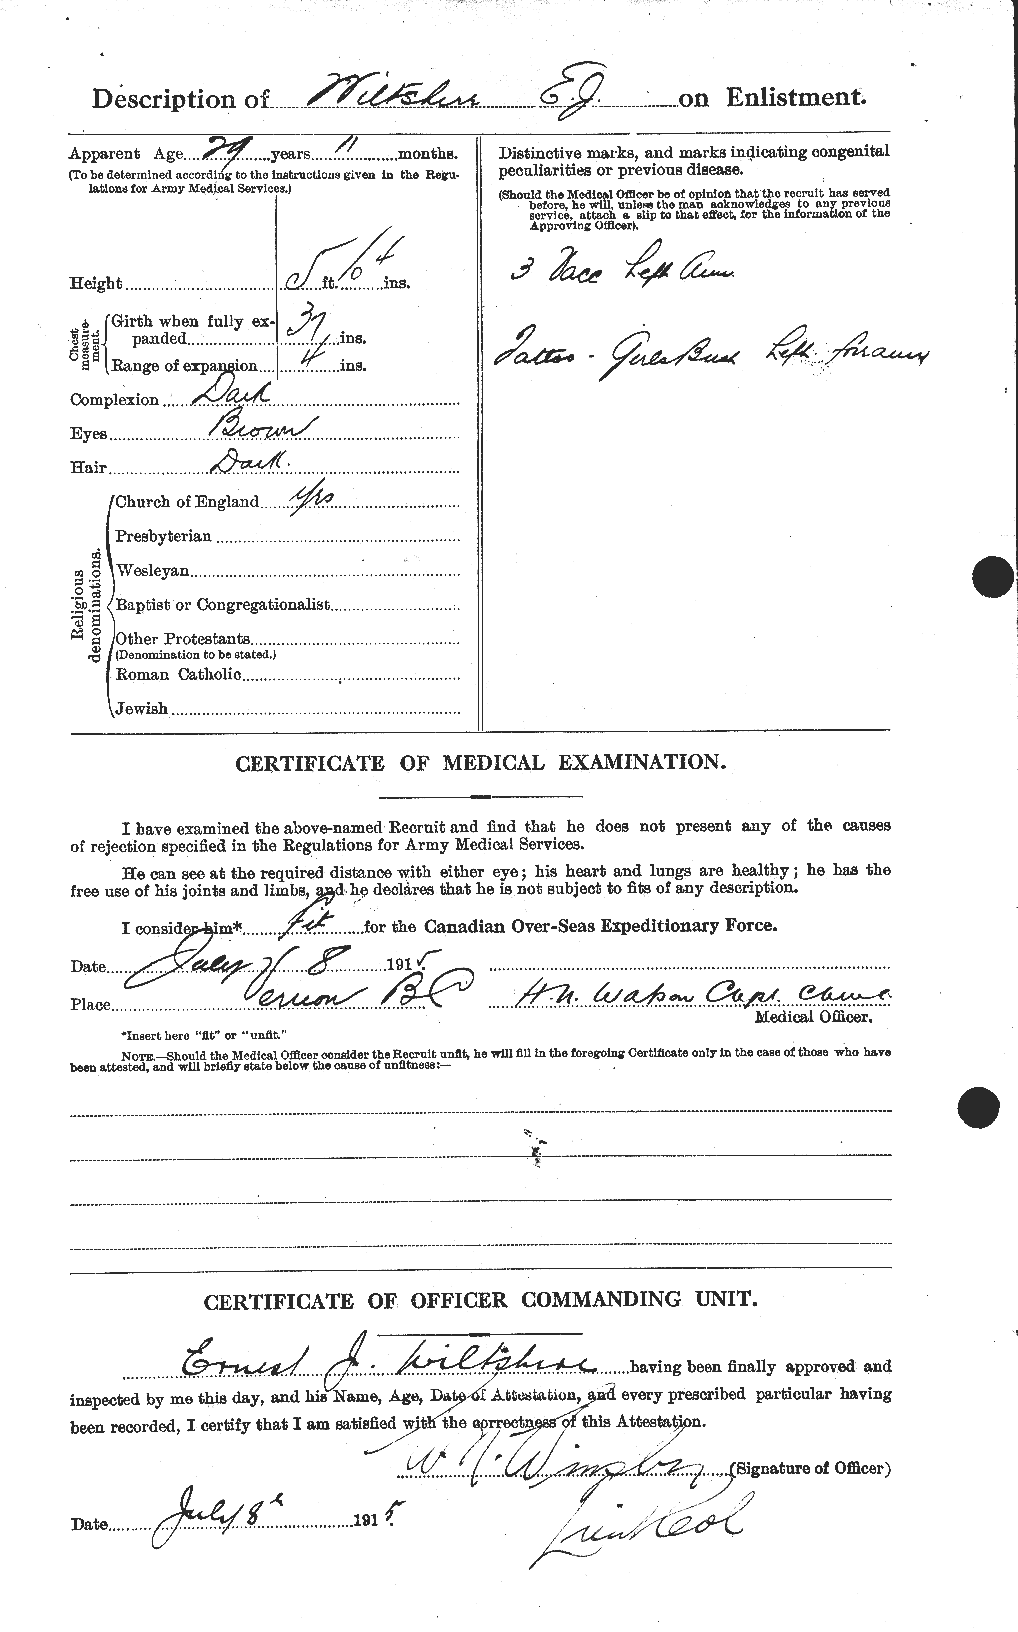 Personnel Records of the First World War - CEF 667137b